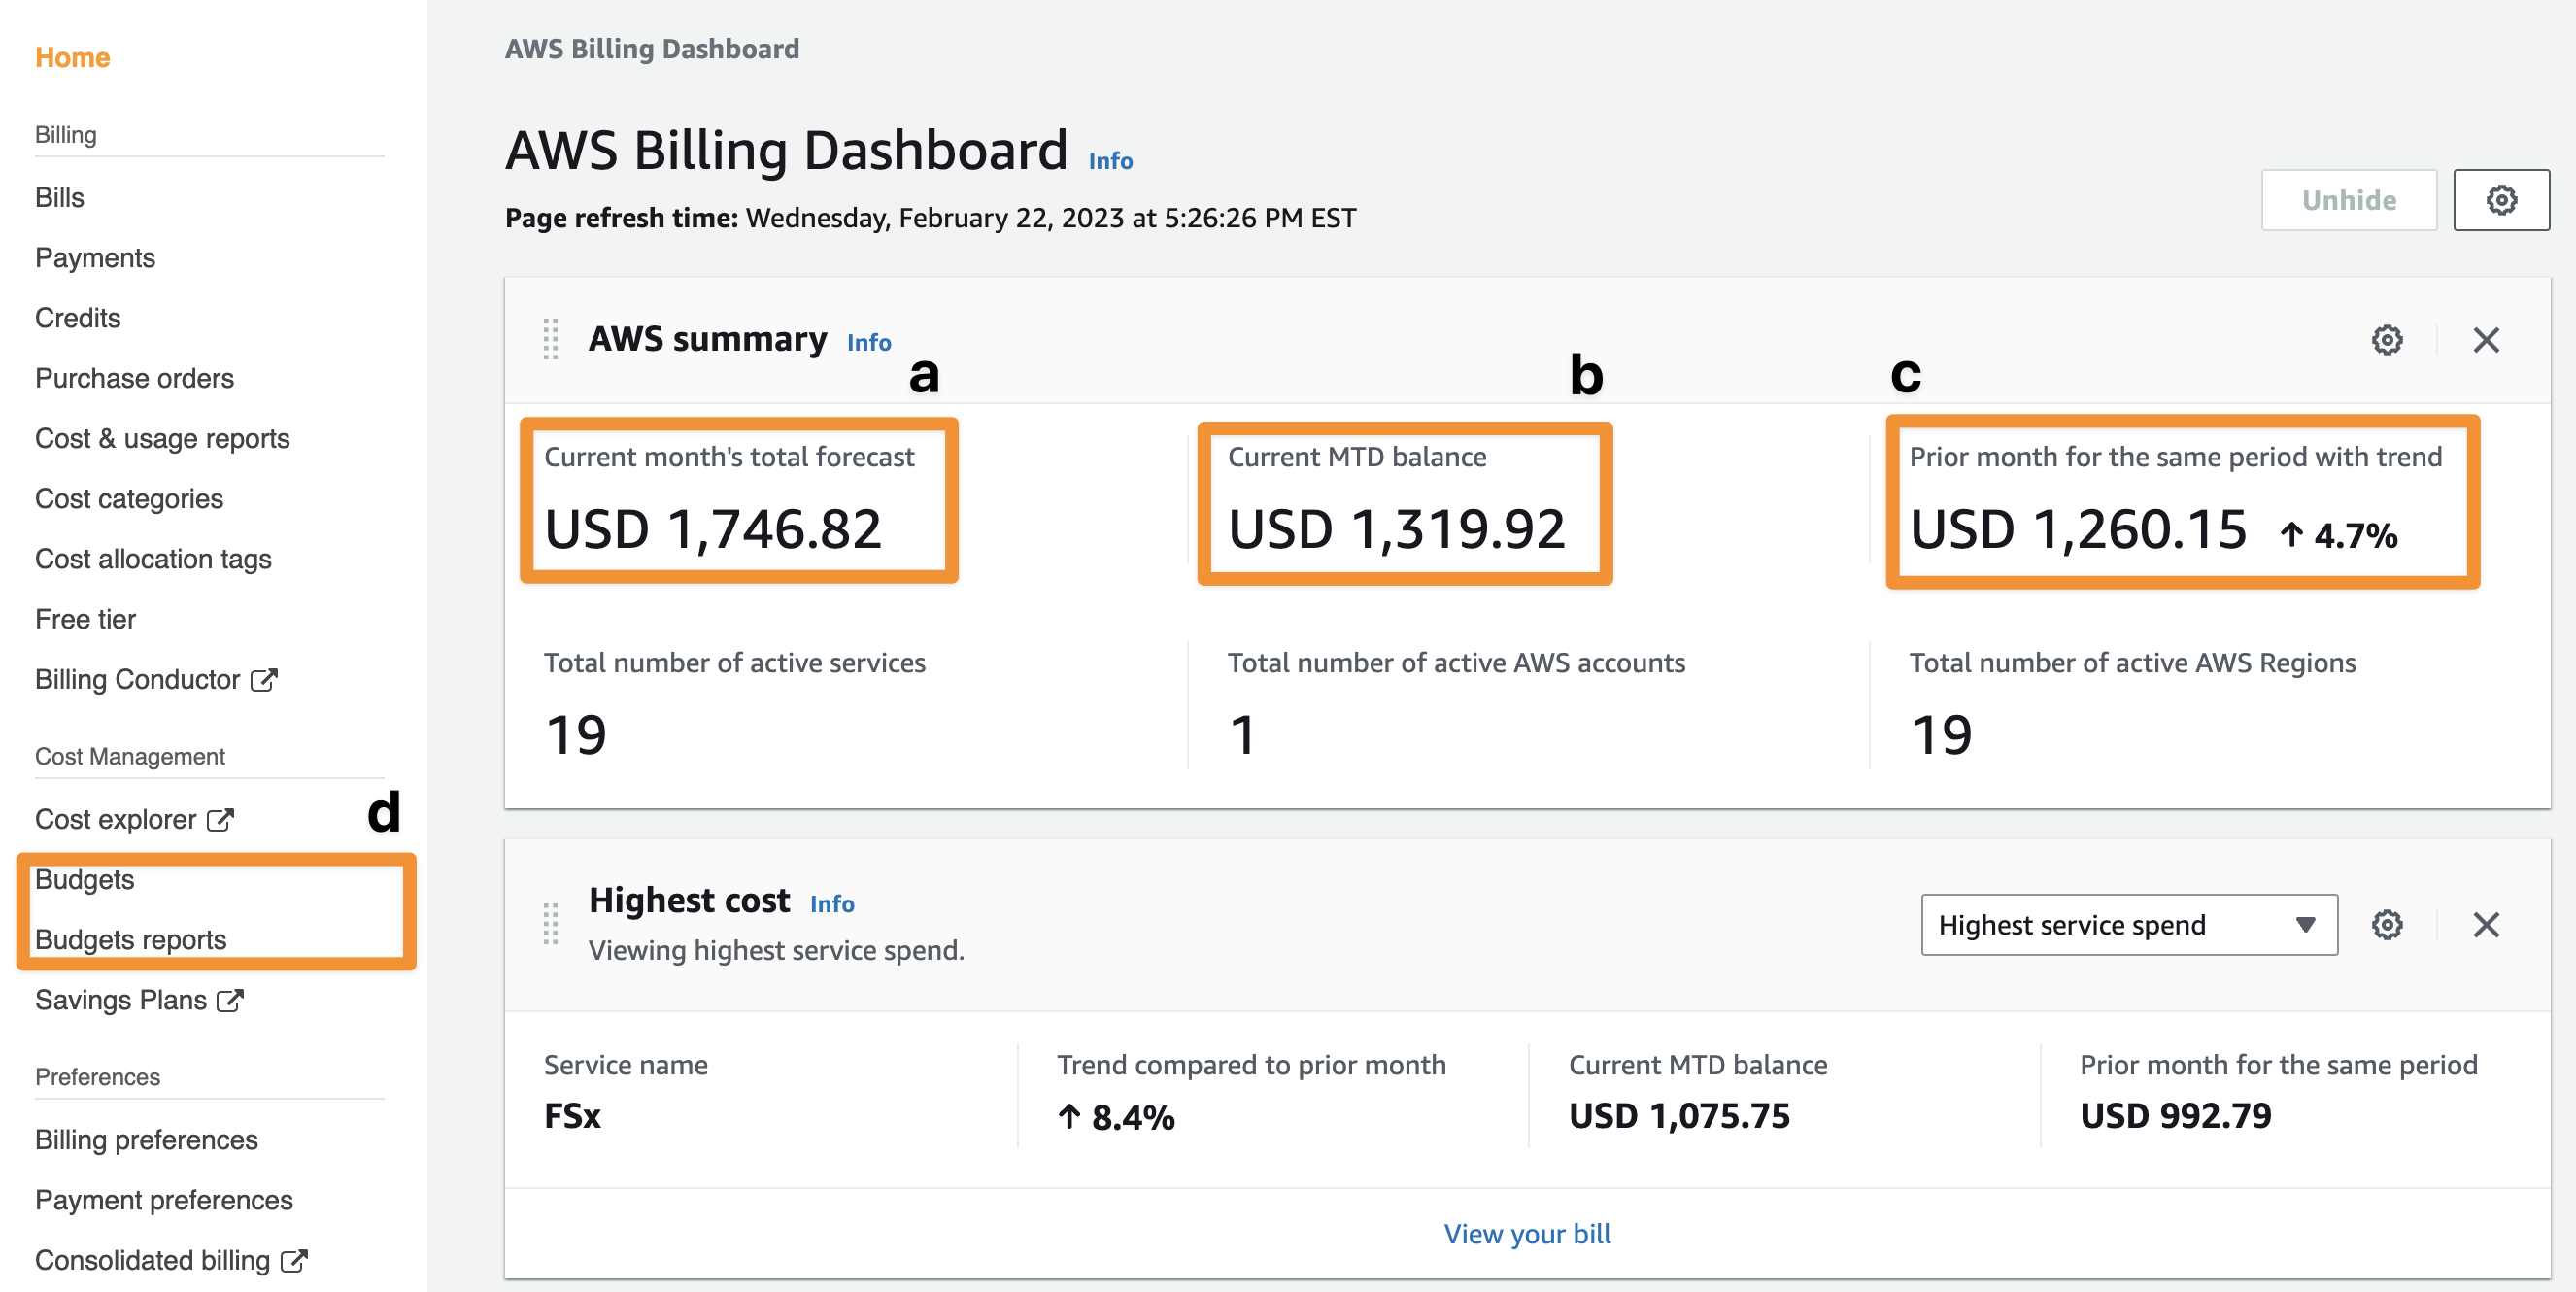 Example AWS Billing Dashboard